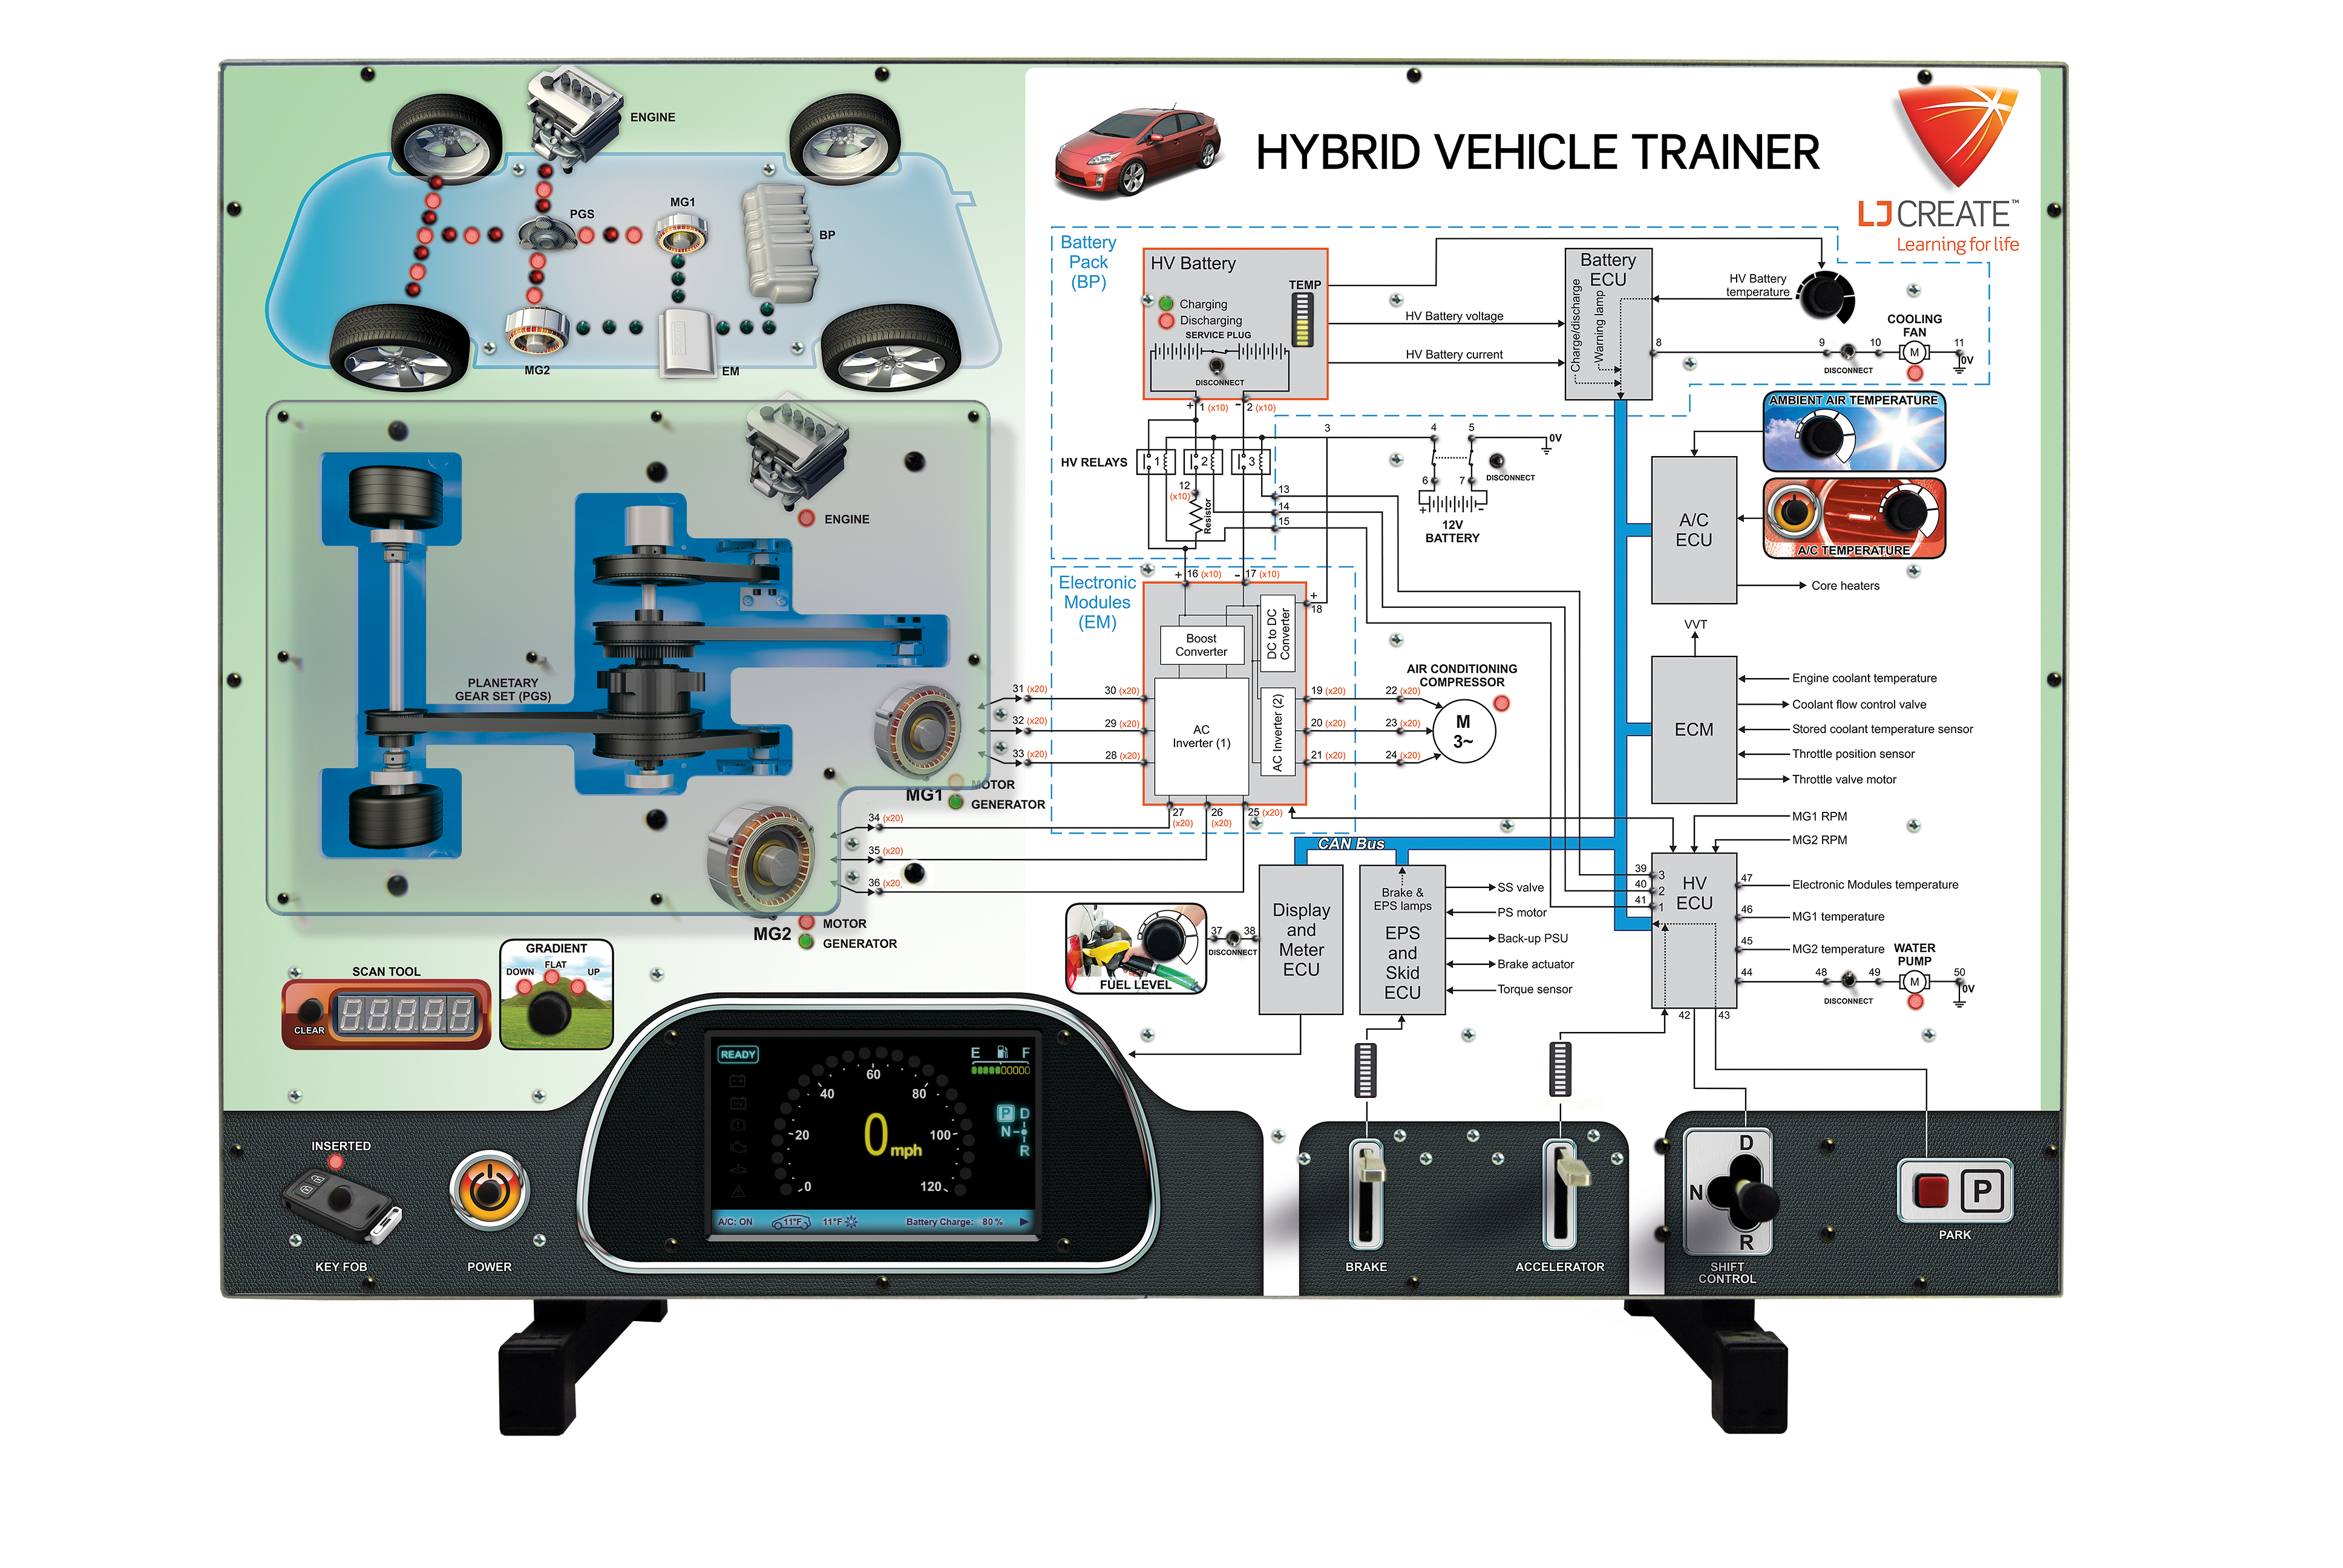 Hybrid Vehicle Systems Panel Trainer